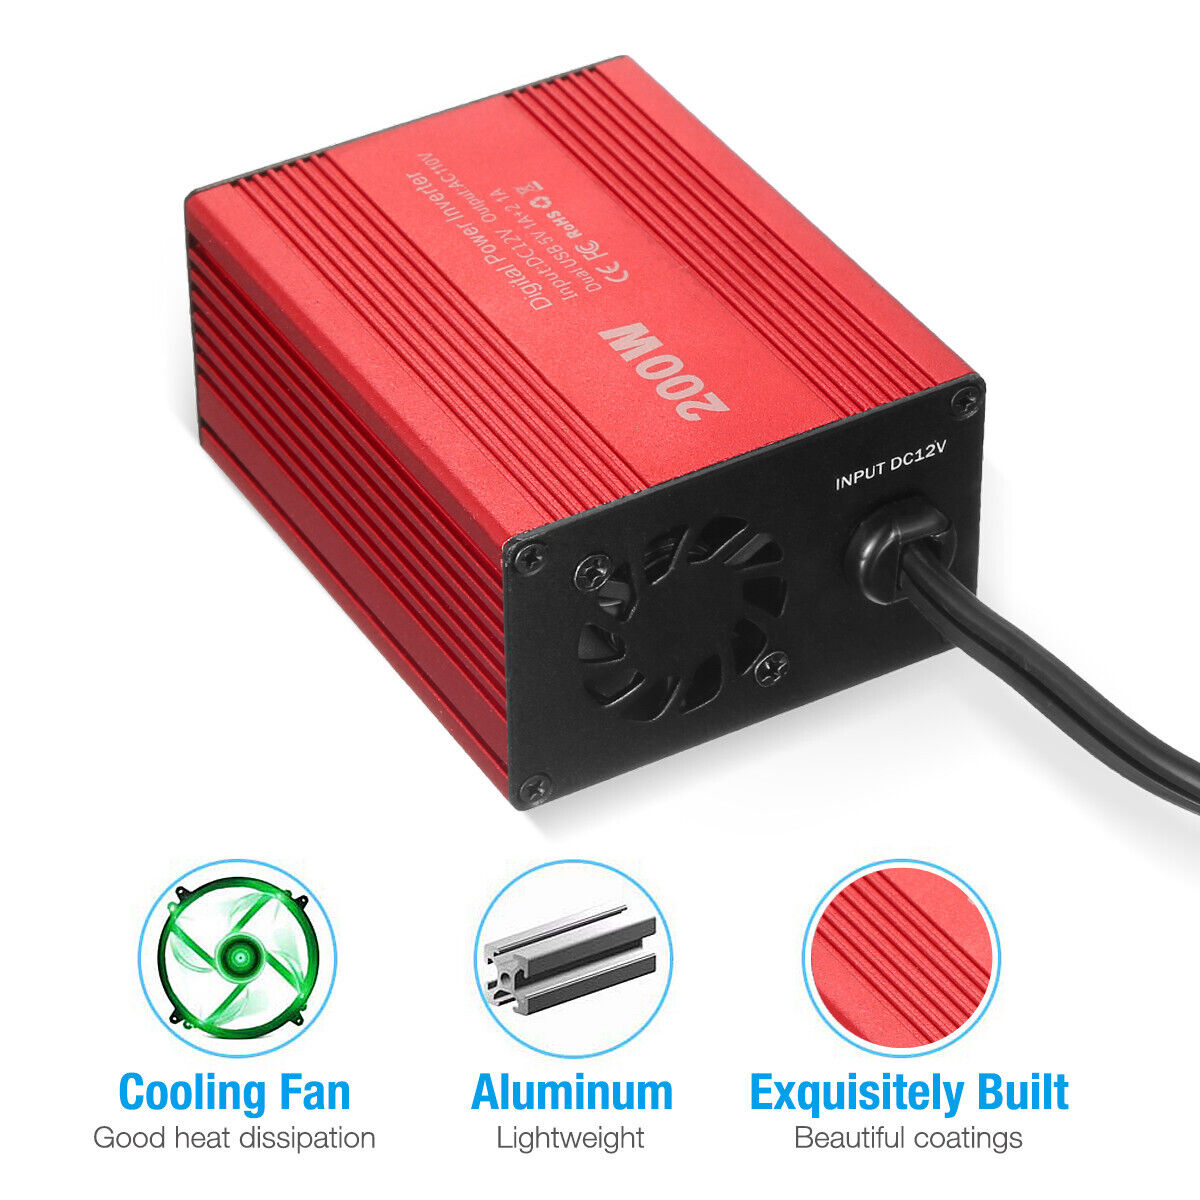 200W Car Power Inverter DC 12V to AC 110V 120V Converter Adapter Charger Outlet Powerextra Does Not Apply - фотография #4